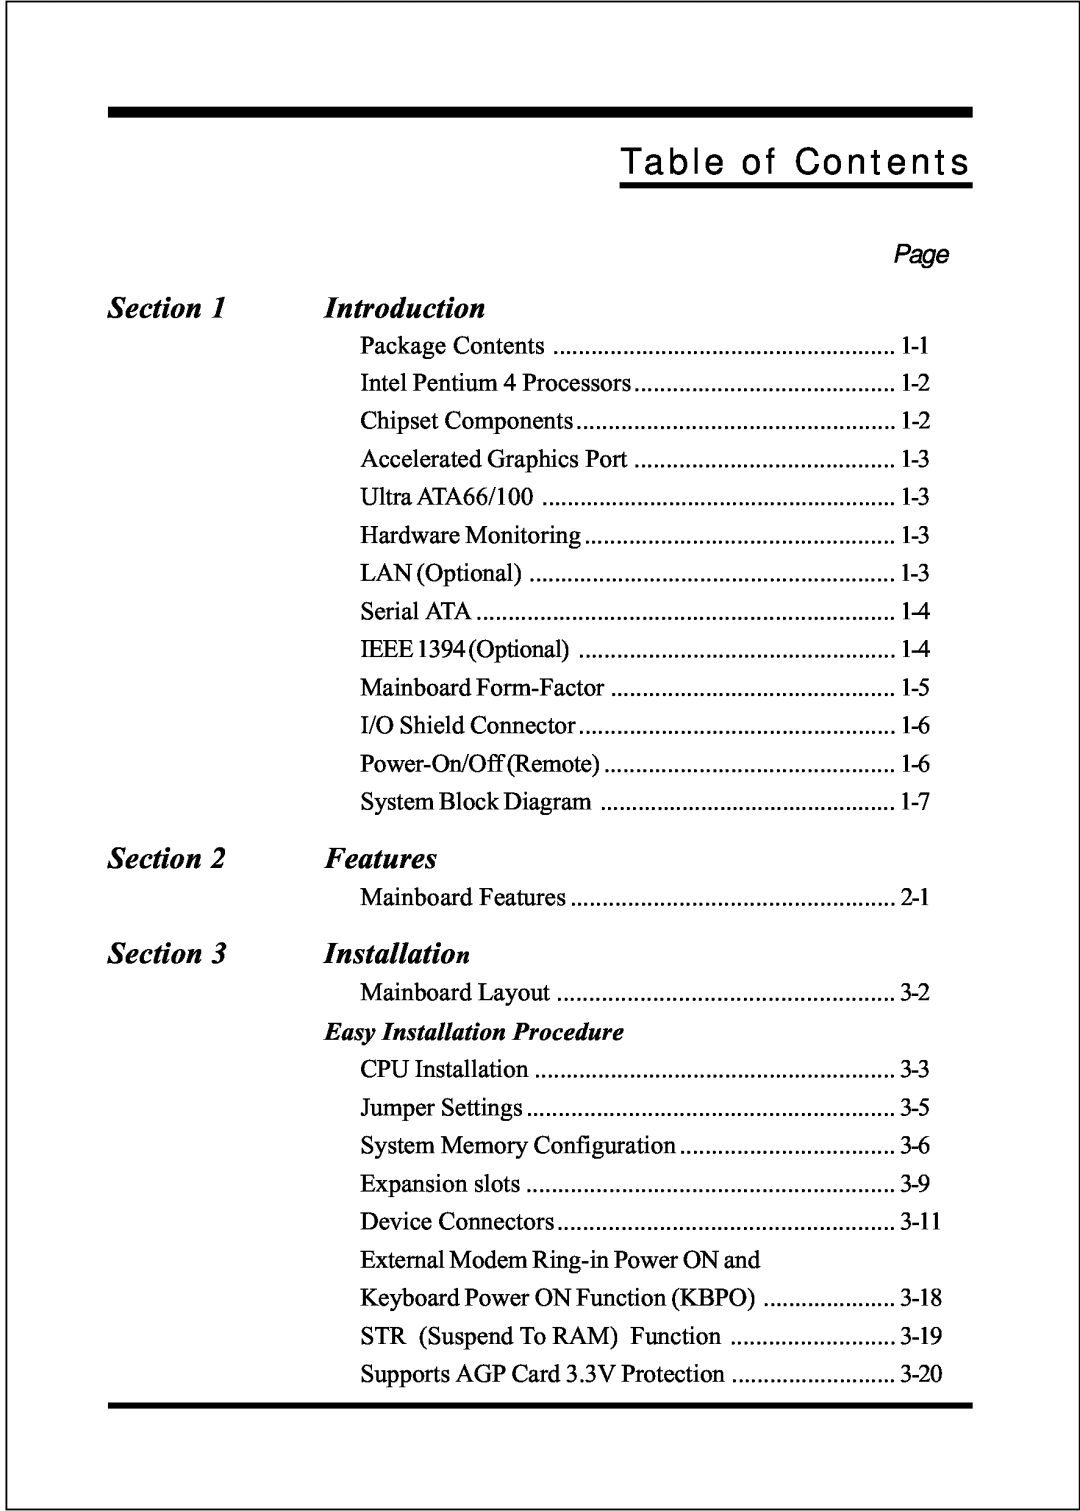 Intel FSB533, FSB800 (PC2700), FSB800 / DDR333 (PC2700) Table of Contents, Section, Introduction, Features, Installation 